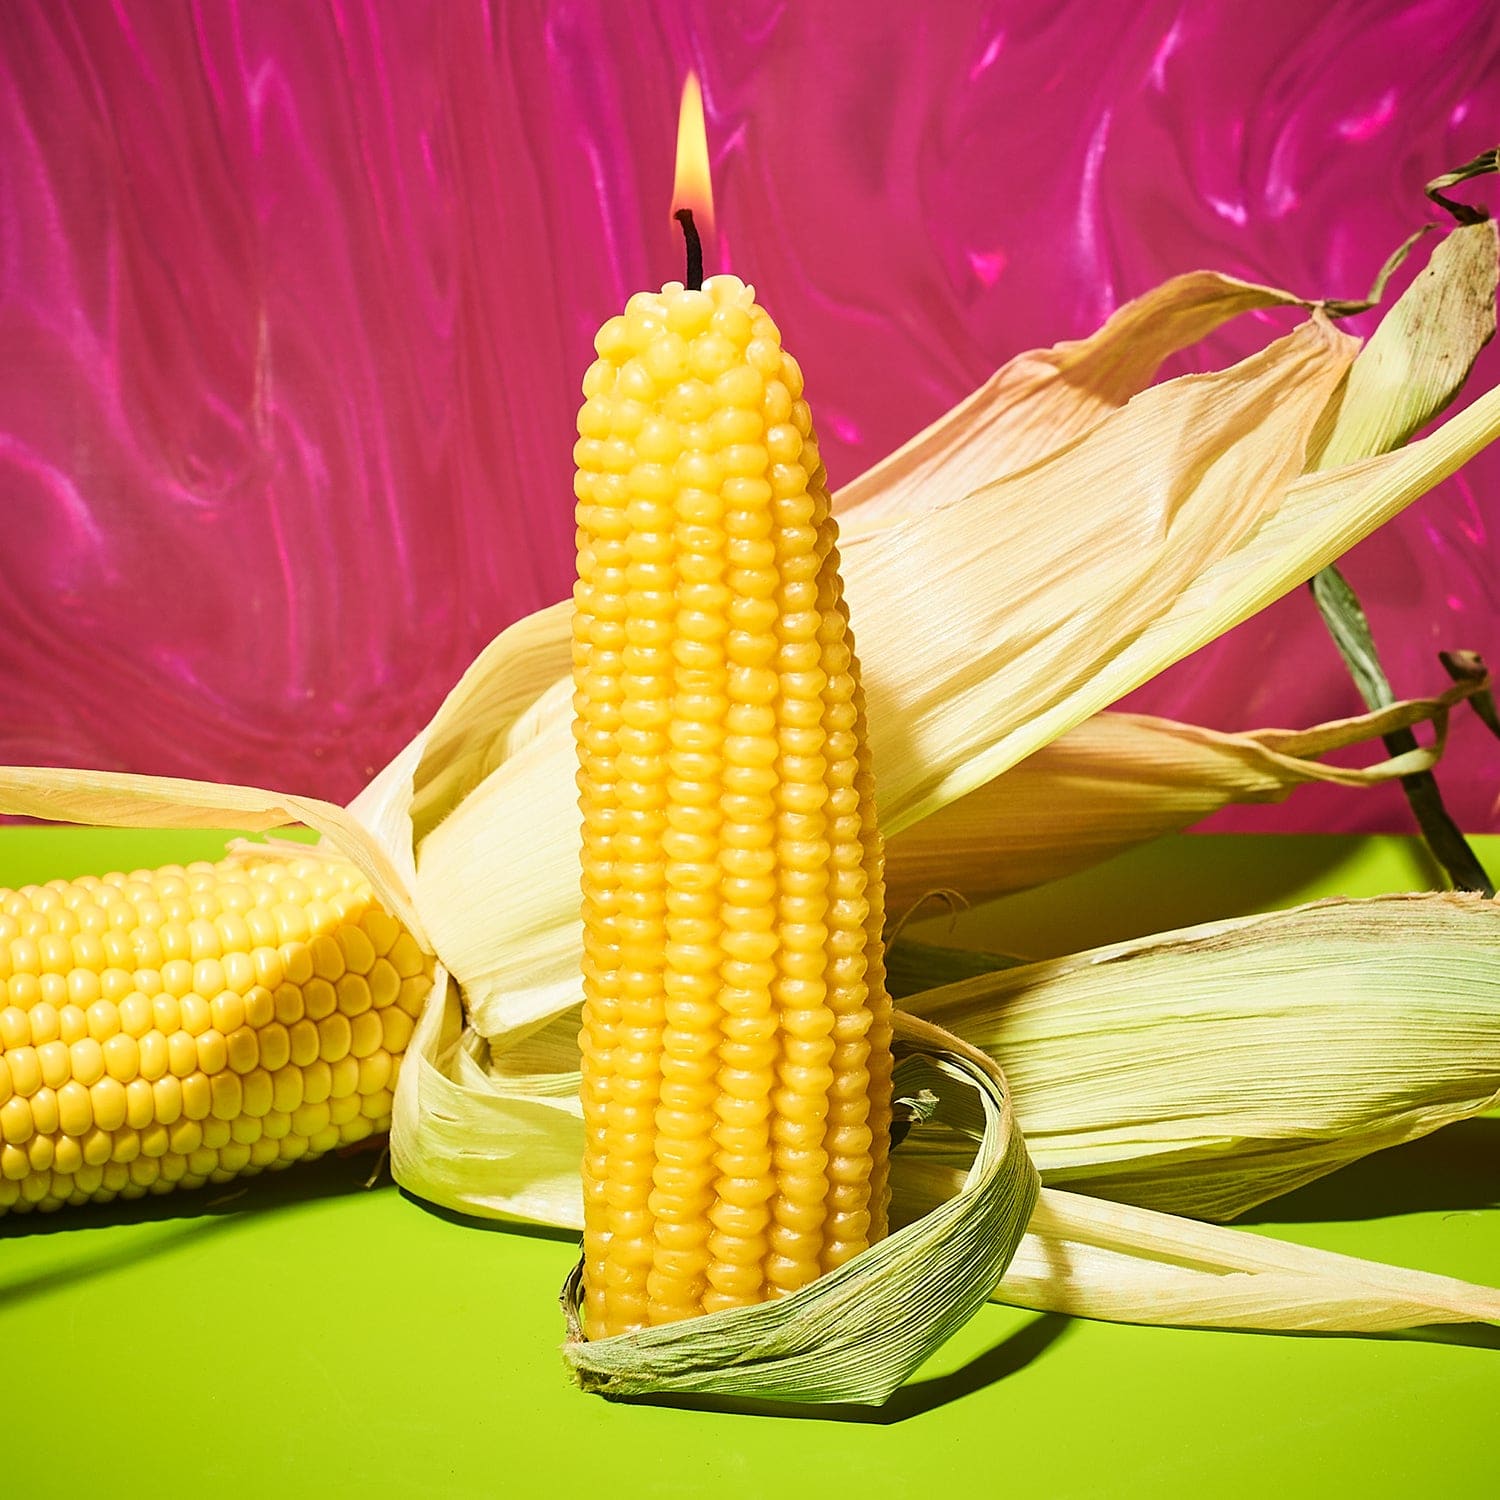 Beeswax Corn Cob Candle 0523 - Candle - Janinecontent - Q223